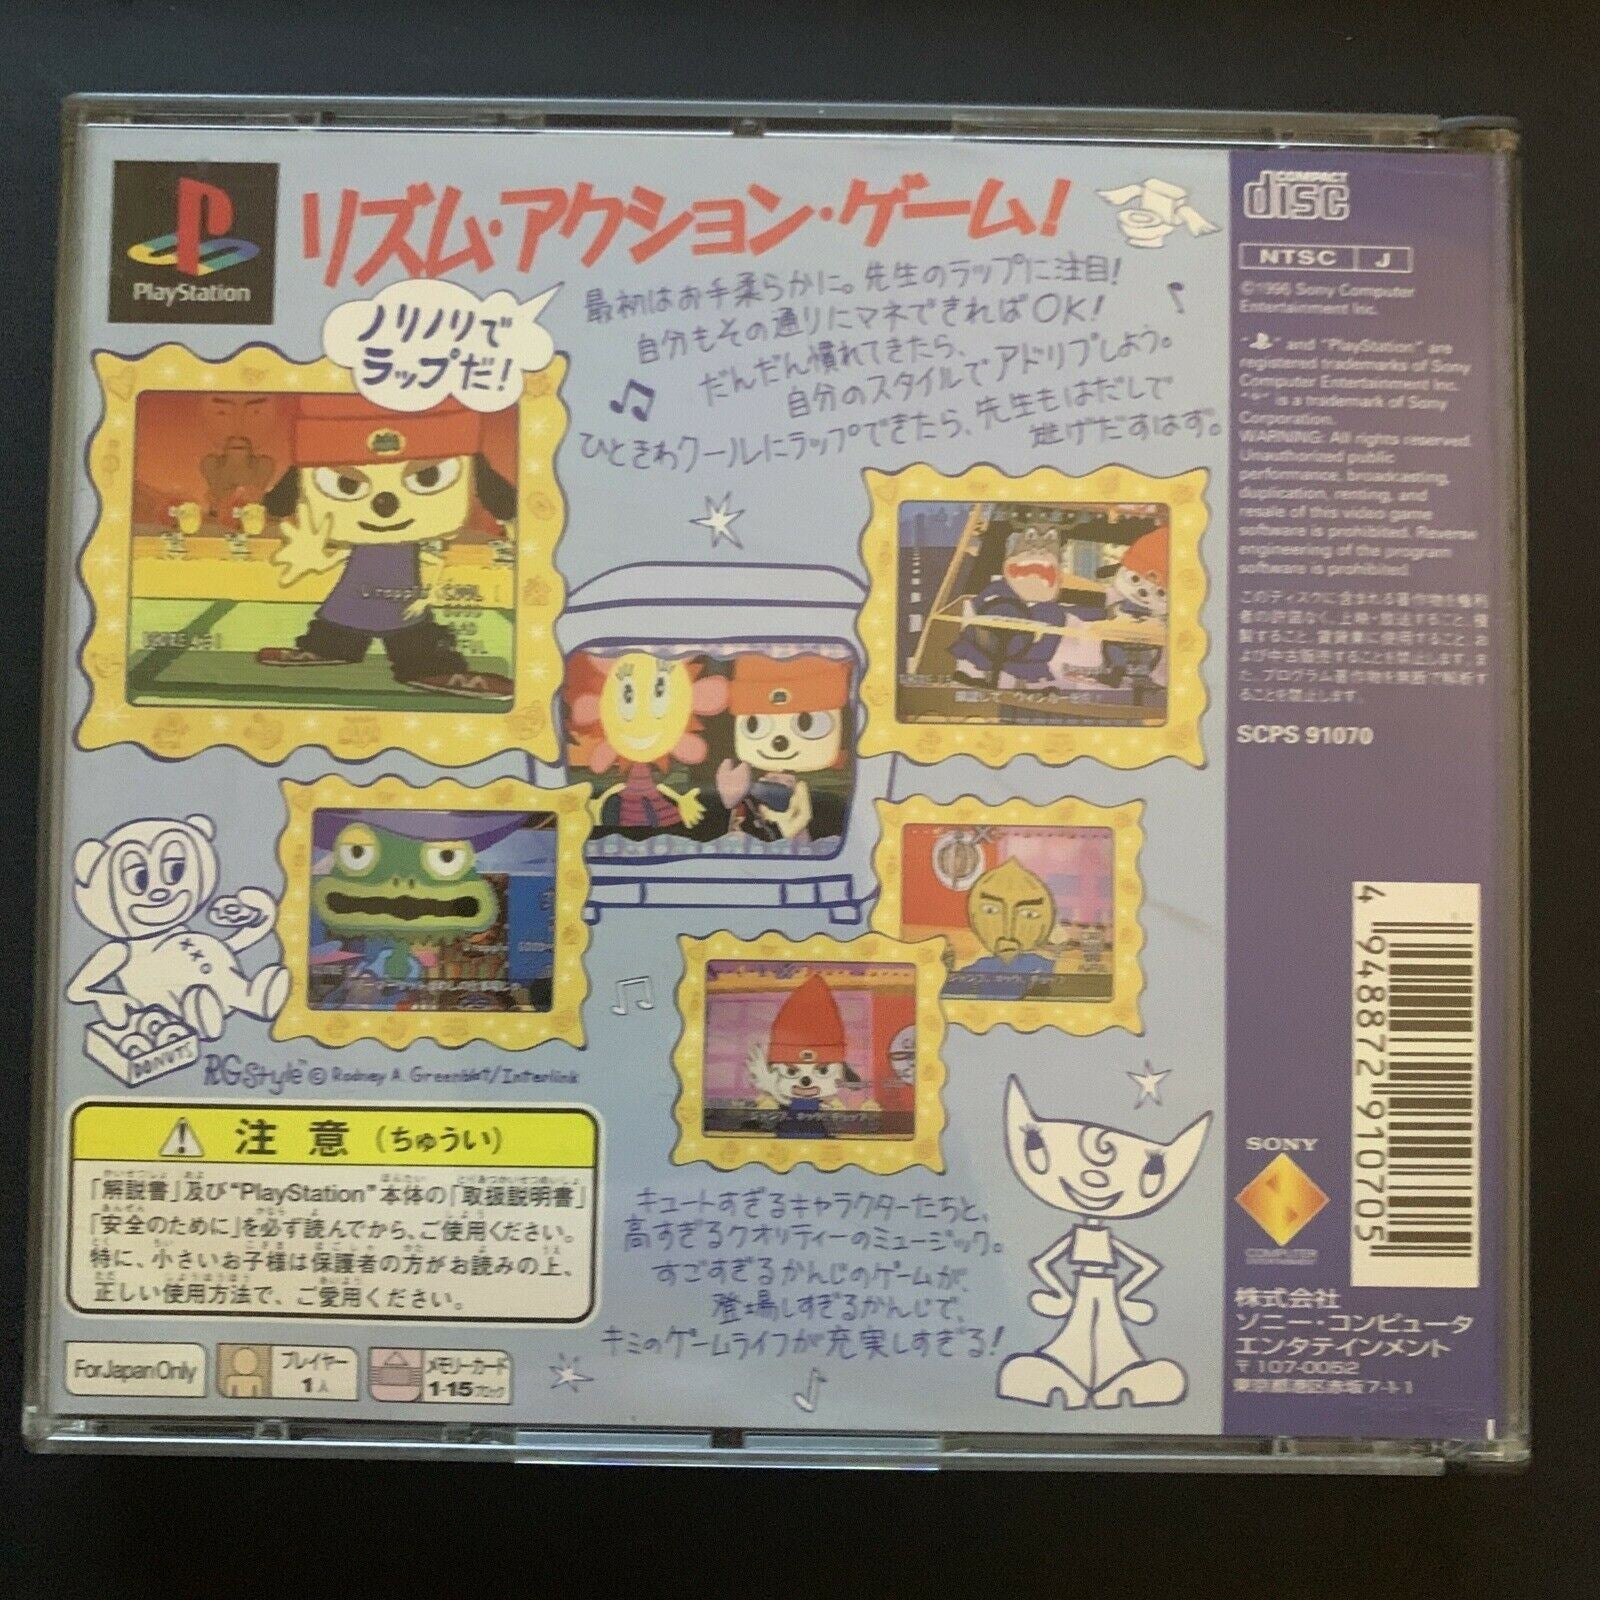 Parappa the Rapper PS1 PlayStation Complete NTSC-J Japan